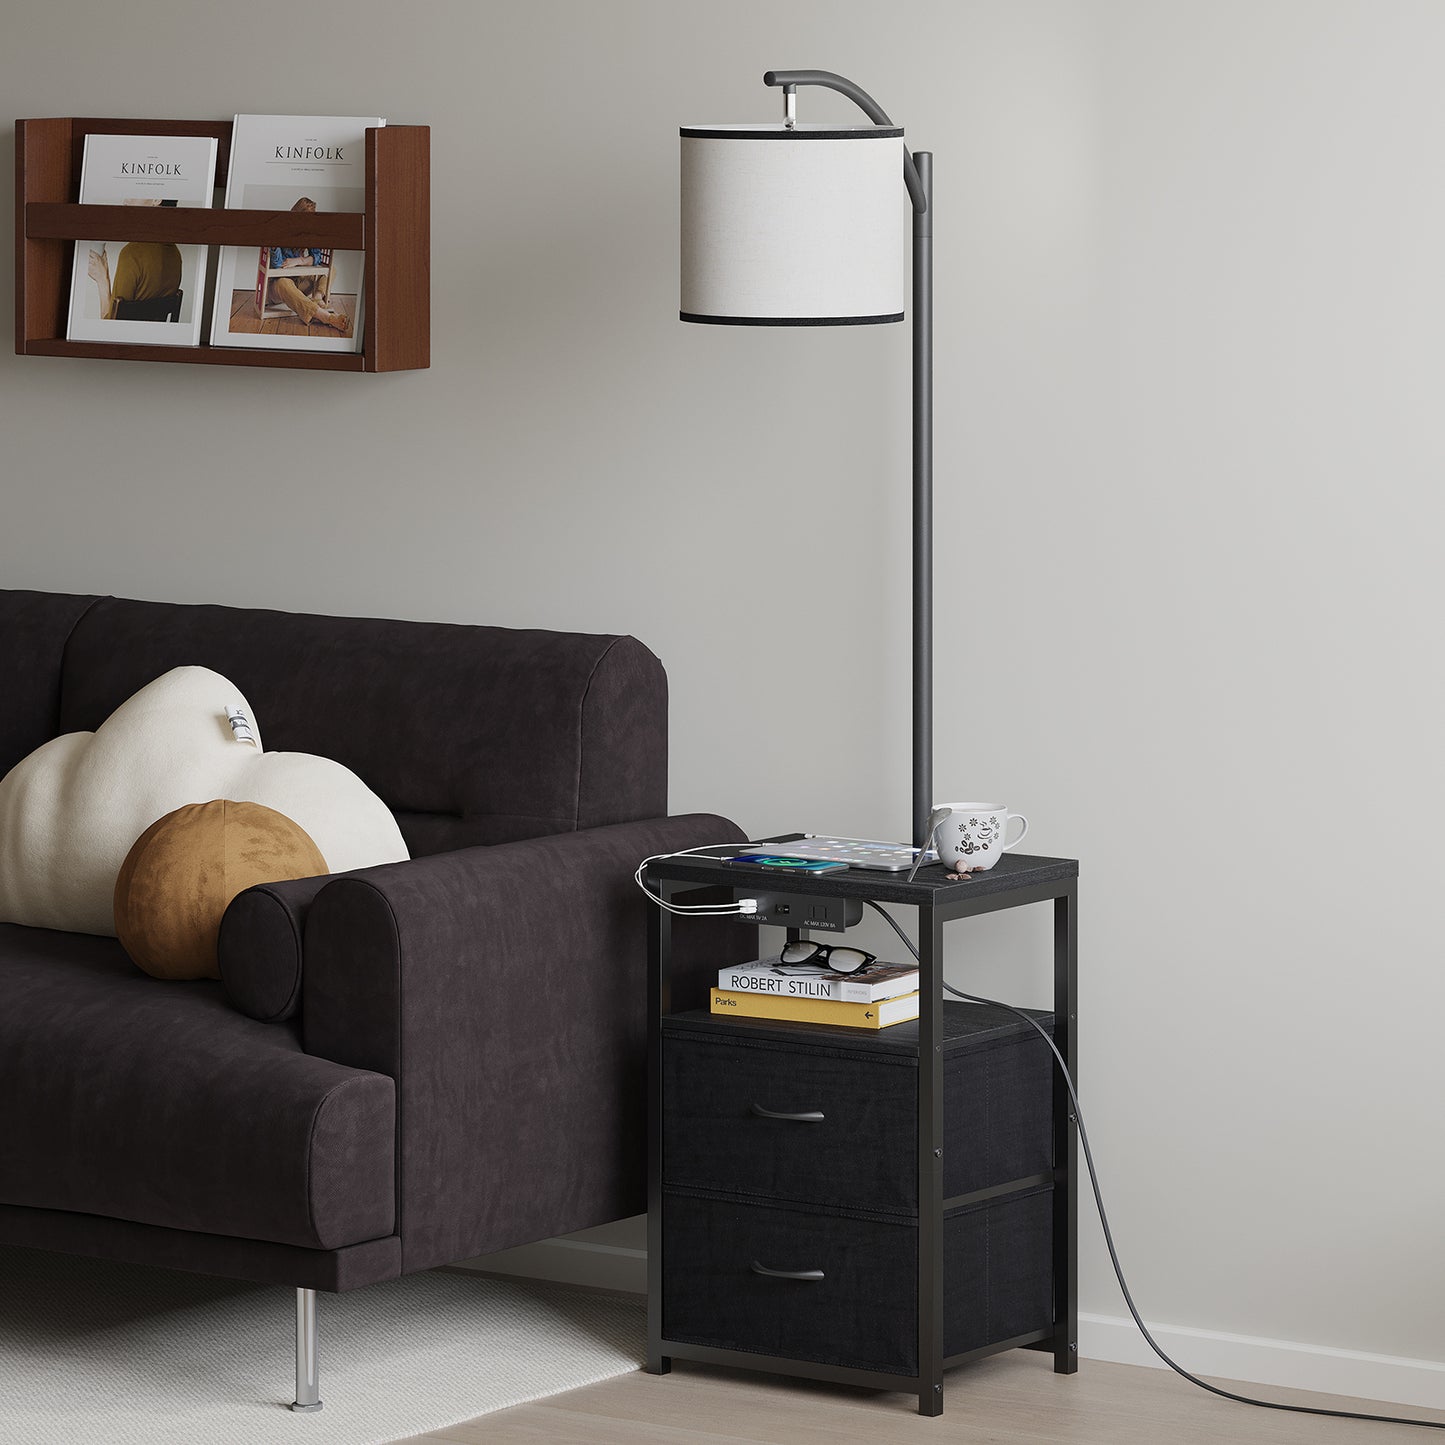 Floor Lamp with Table, Nightstand with Drawer,USB Port End Table Side Table & Reading Light - Black